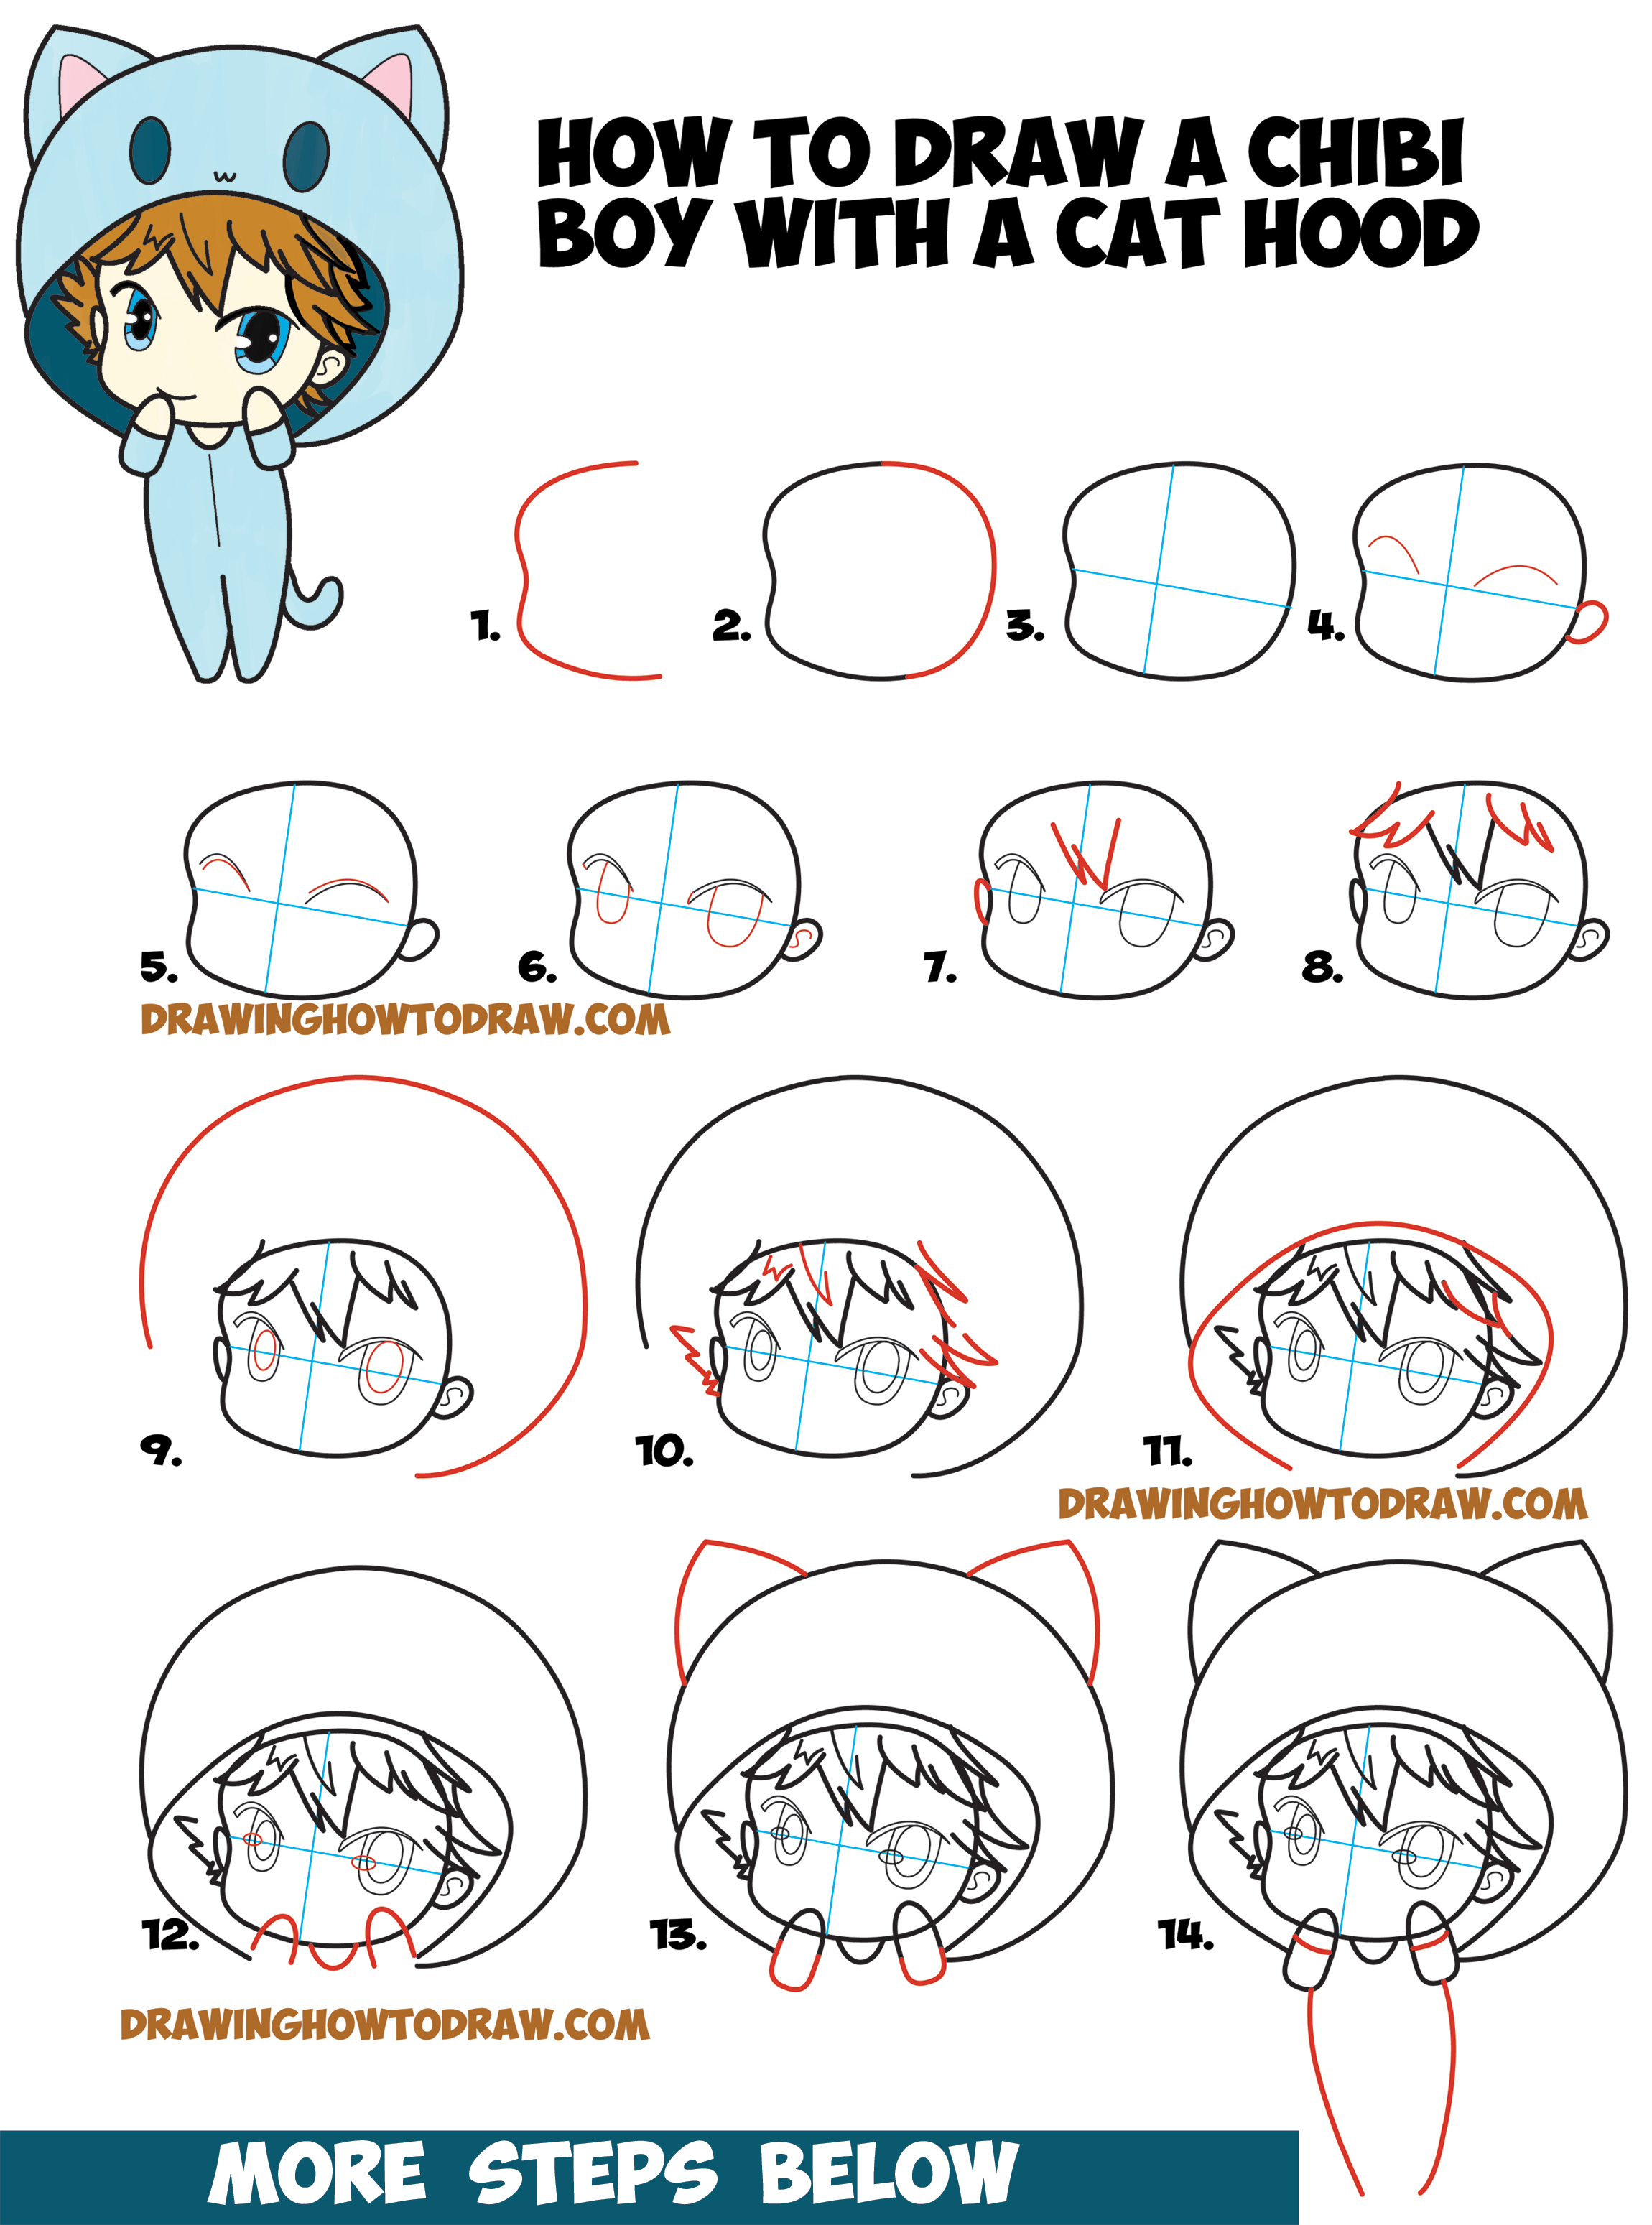 How to Draw a Chibi Boy with Hood On - Drawing Cute Chibi Boys - Easy Step by Step Drawing Tutorial for Kids